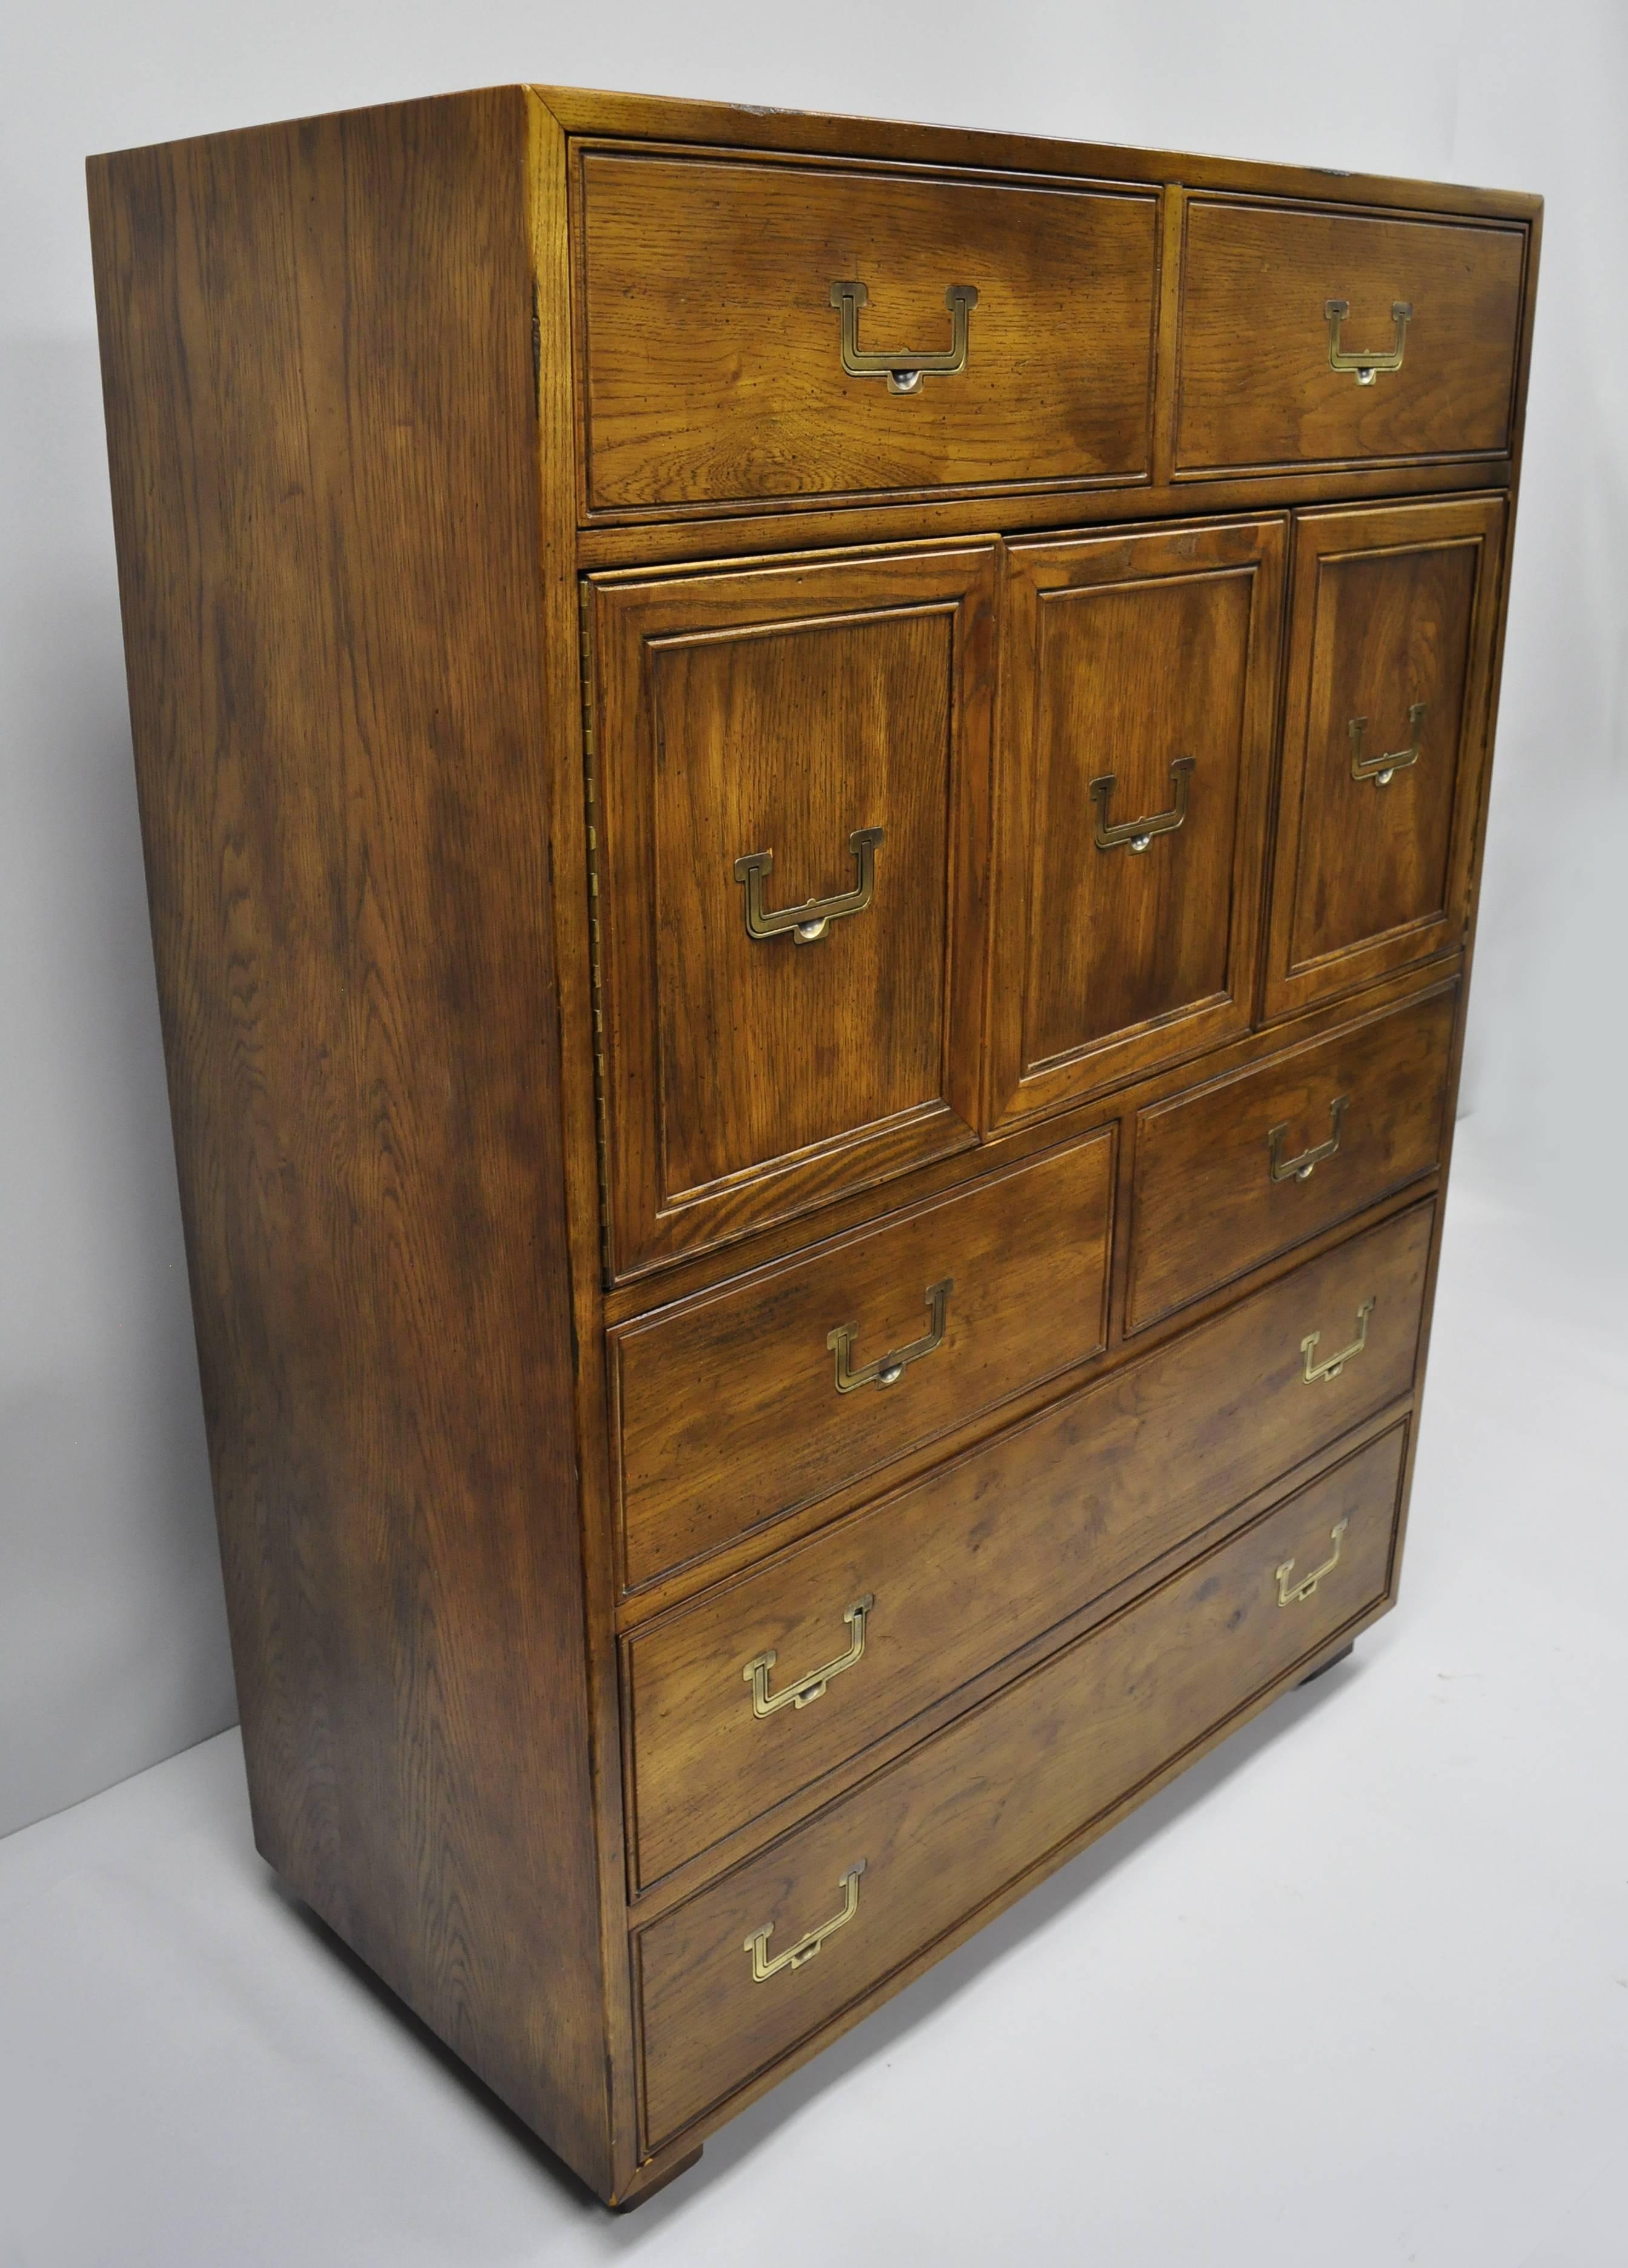 Artefacts by Henredon Campaign style tall dresser. Item features beautiful wood grain, original label, seven dovetailed drawers, swing doors, campaign style inset solid brass hardware, quality American craftsmanship, mid-20th century. Measurements: